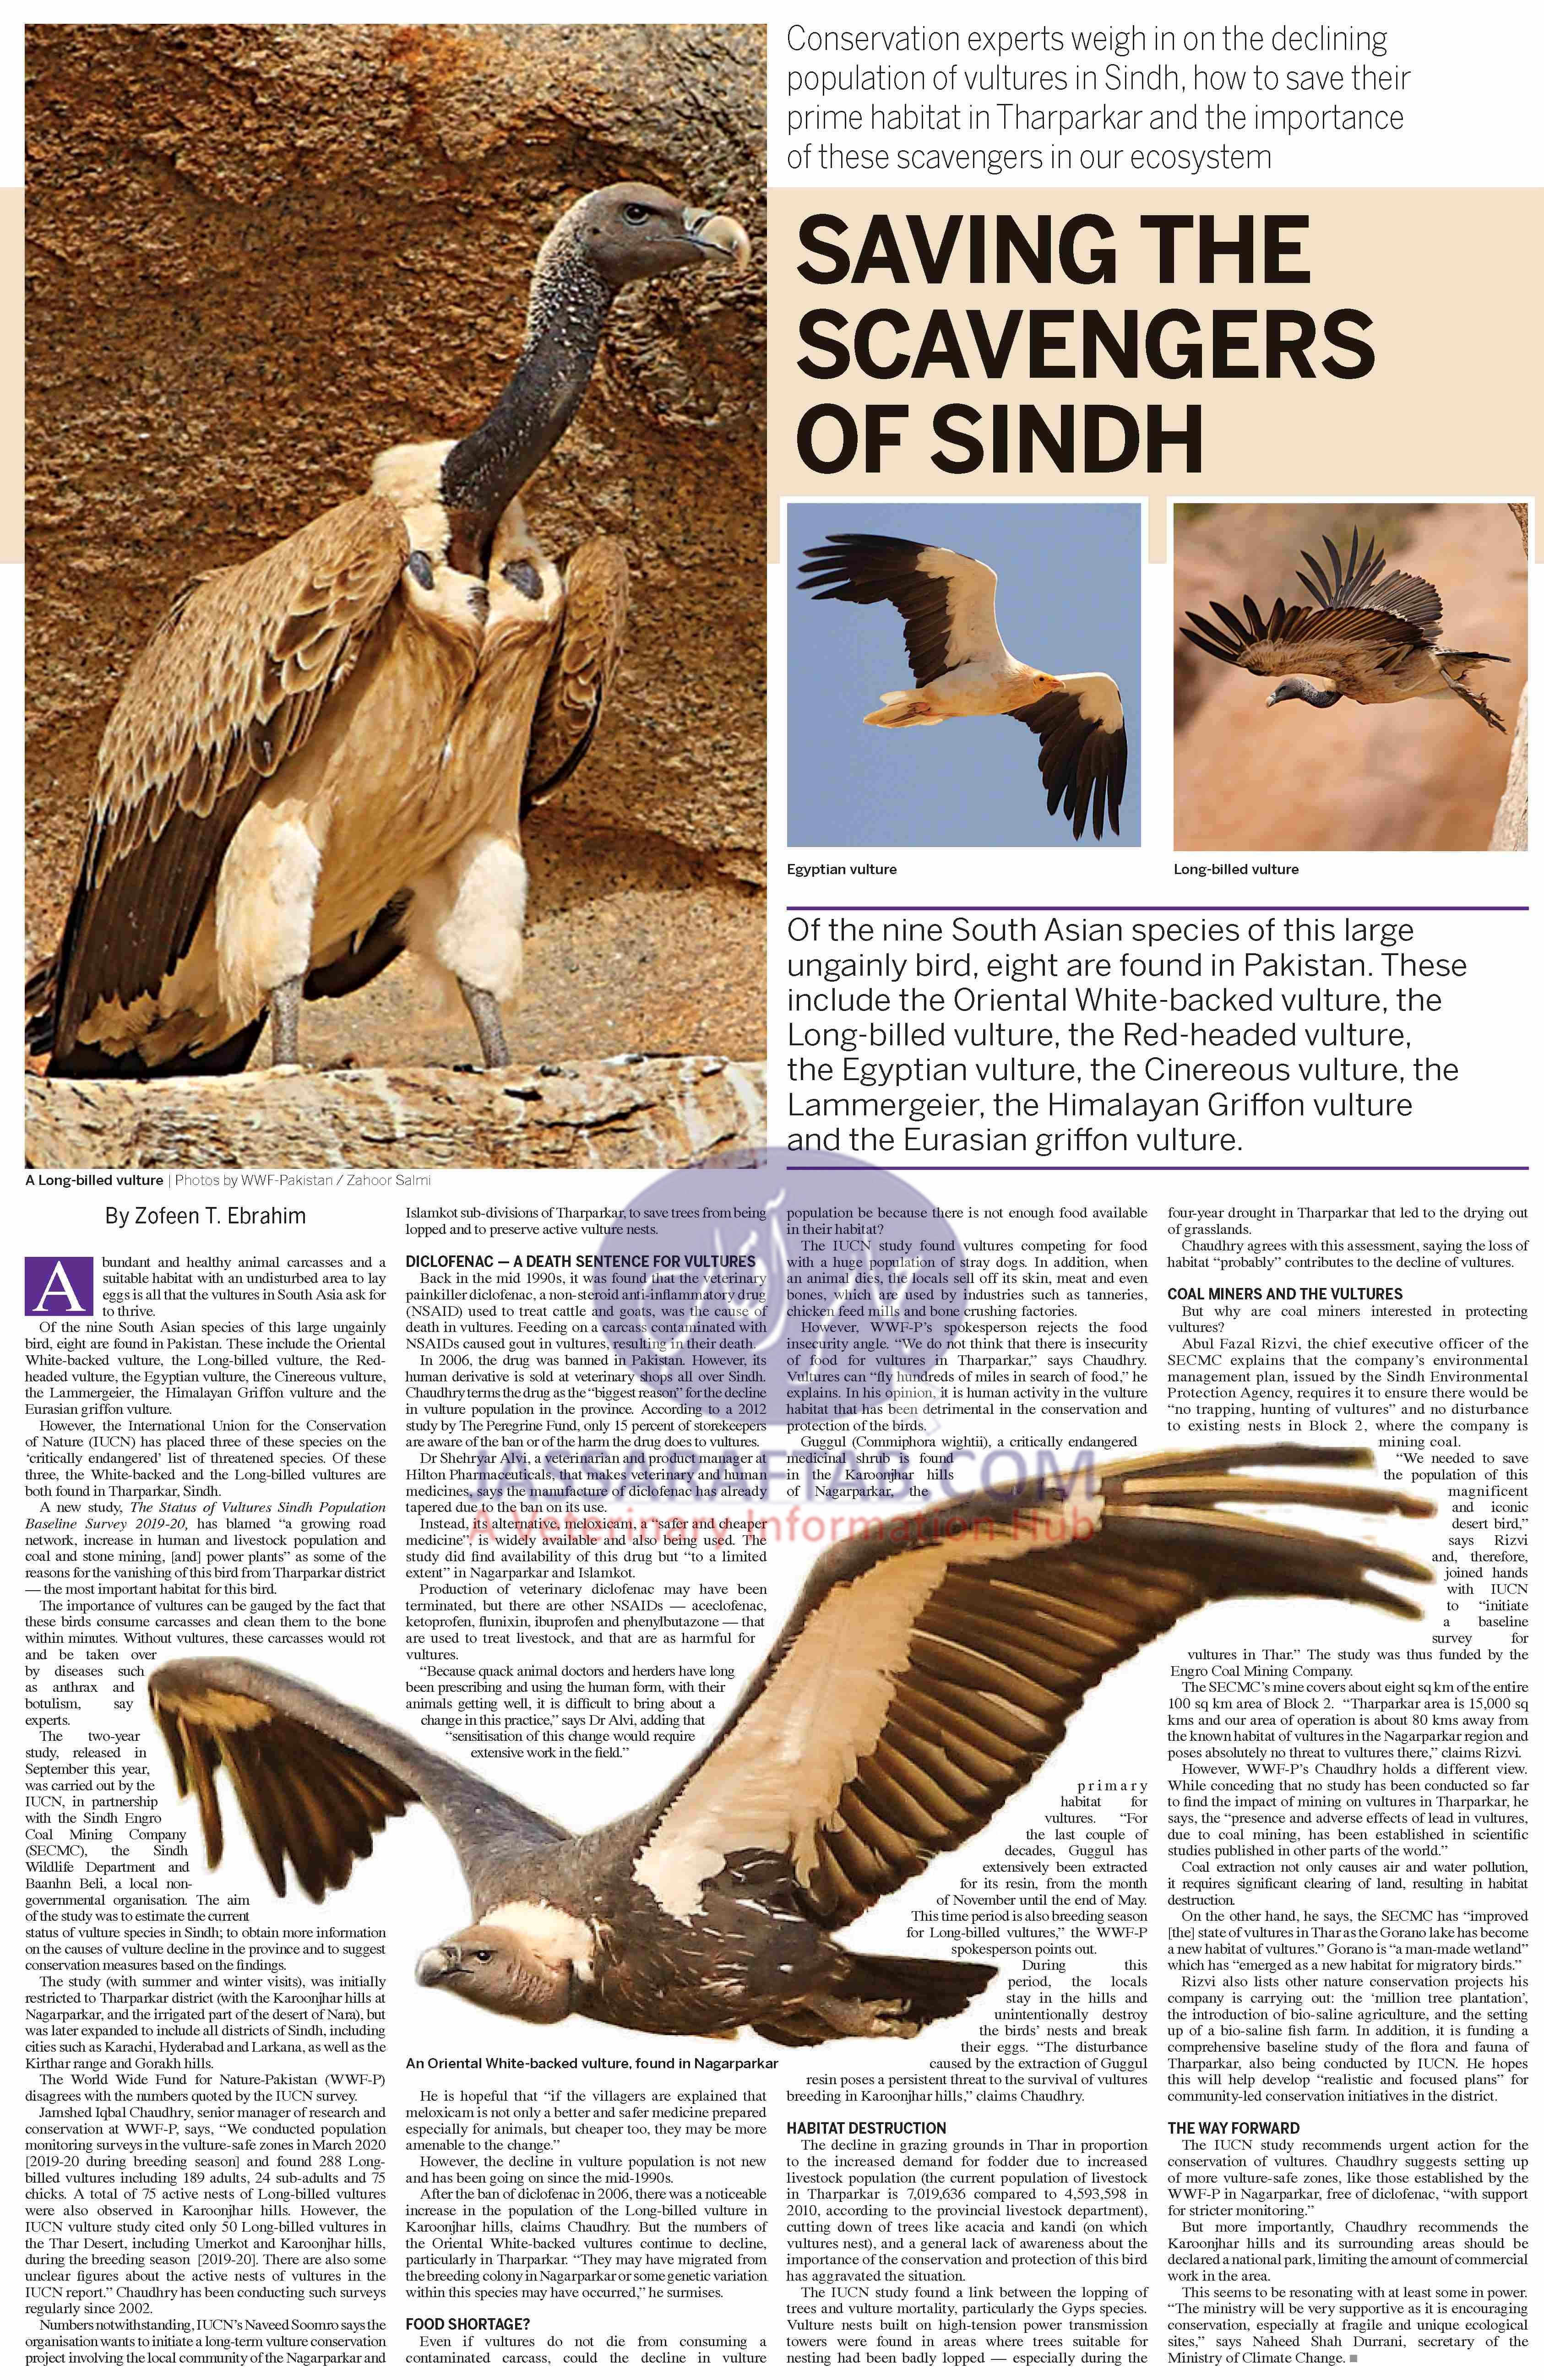 Conservation of Vultures Scavengers - Report on Species of Vulture bird & Vulture population in Sindh.